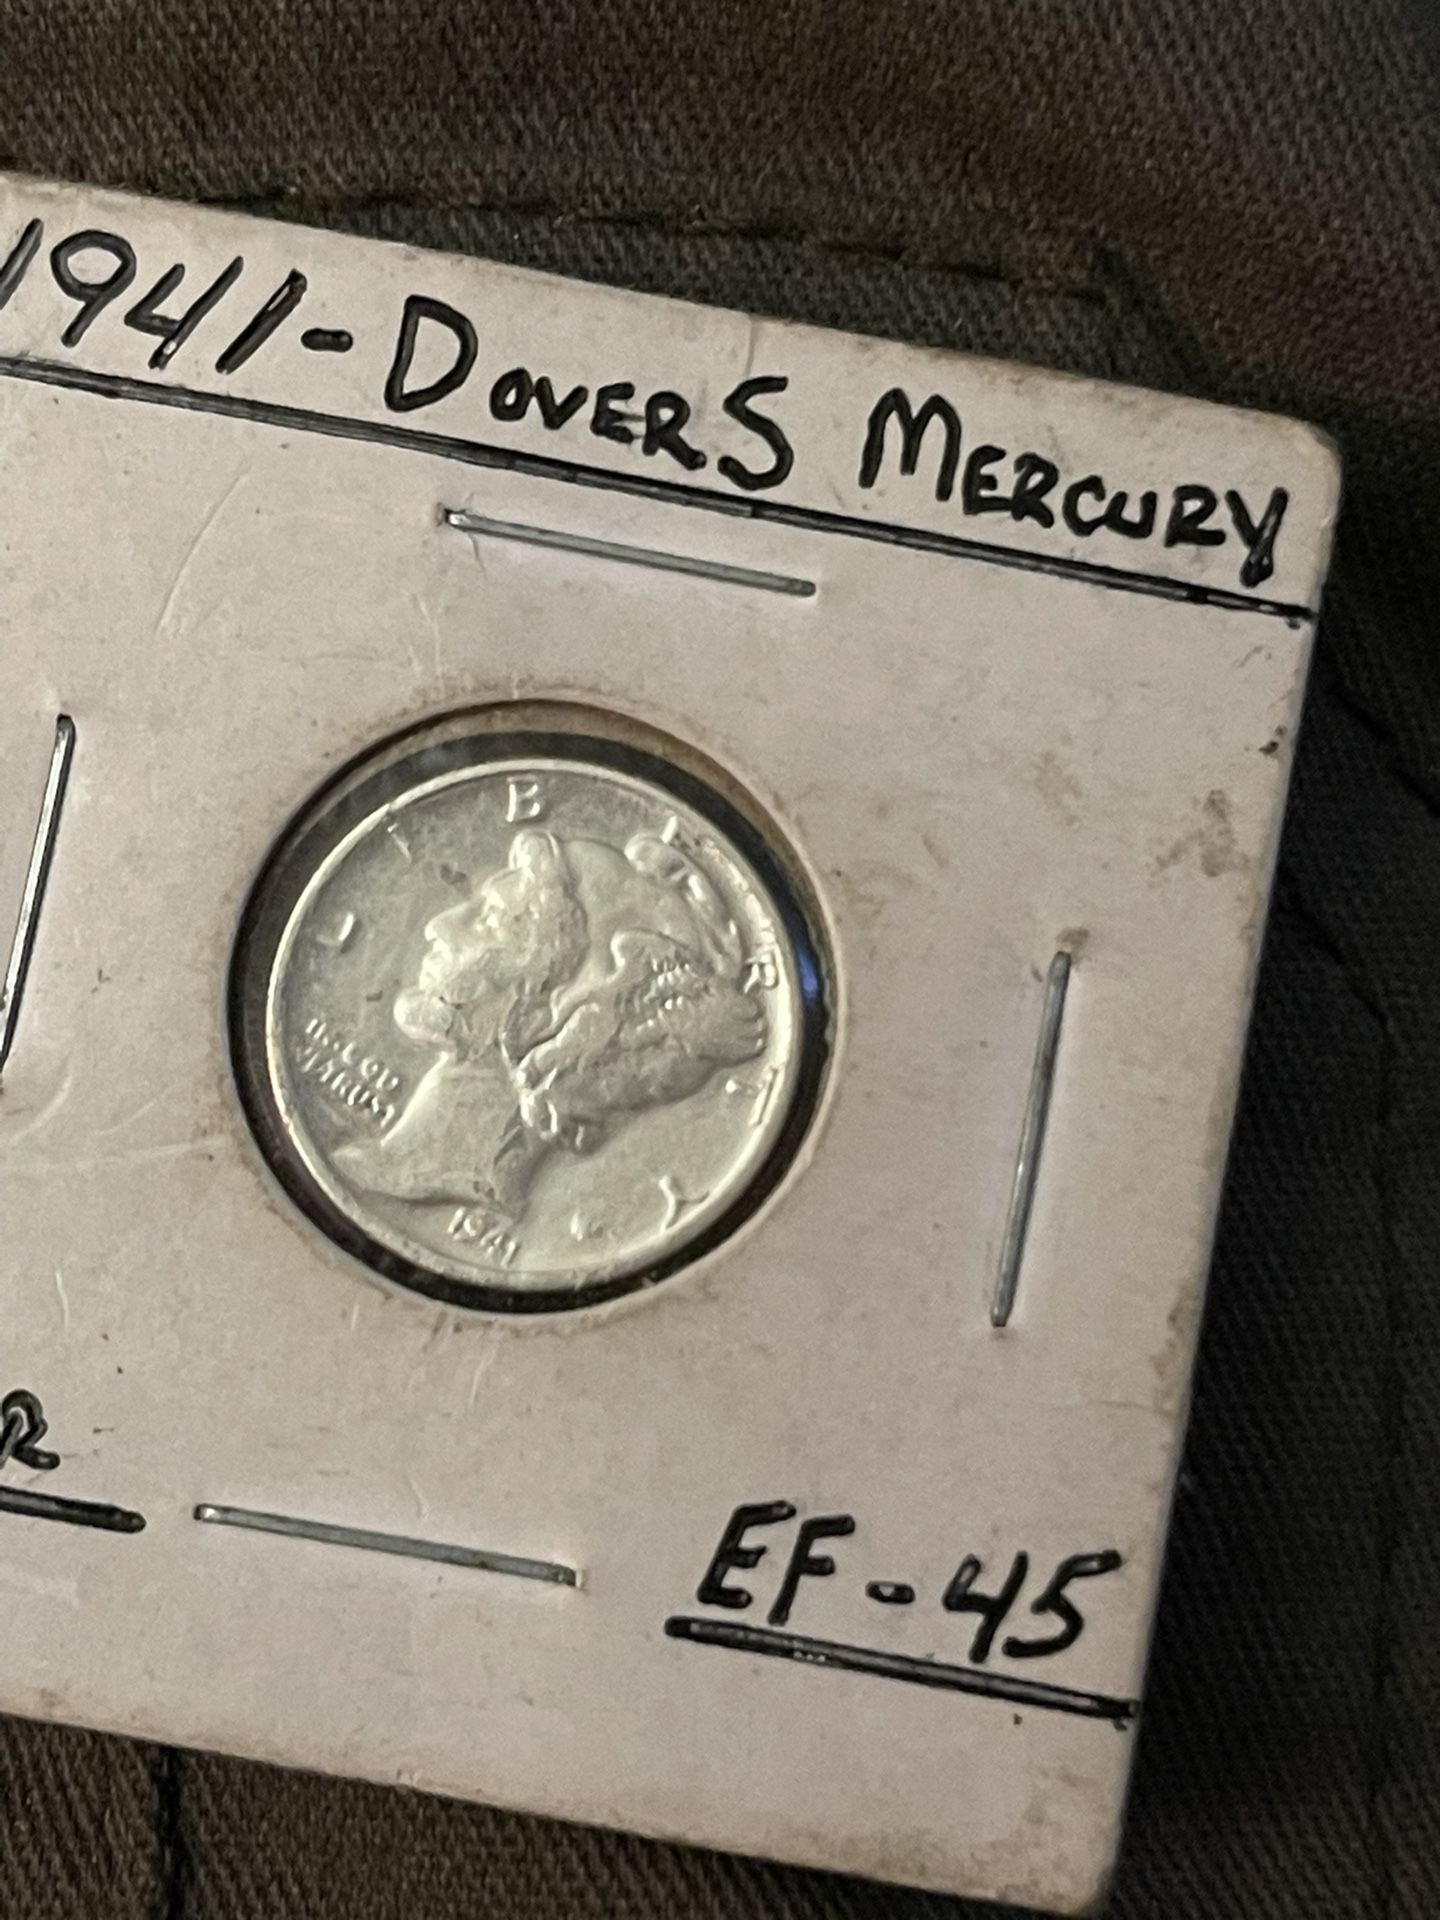 1942 s mercury dime with star error and also has solid bans on the columns on obverse side